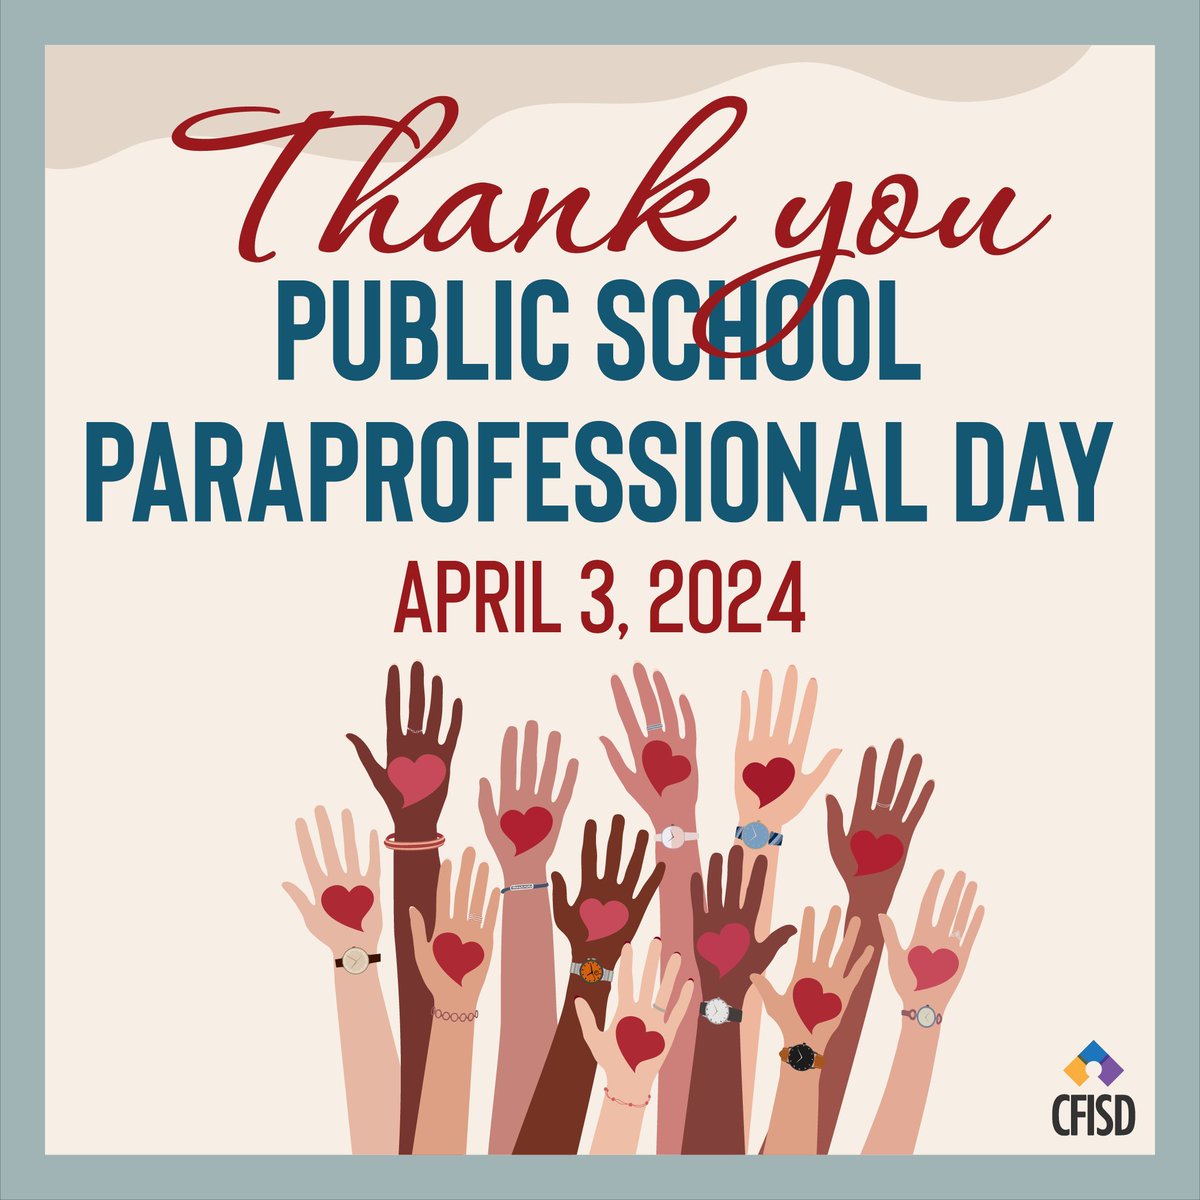 Today is Public School Paraprofessional Day. Thank you to all our CFISD paraeducators for Bringing Out the Best in our students! #CFISDspirit